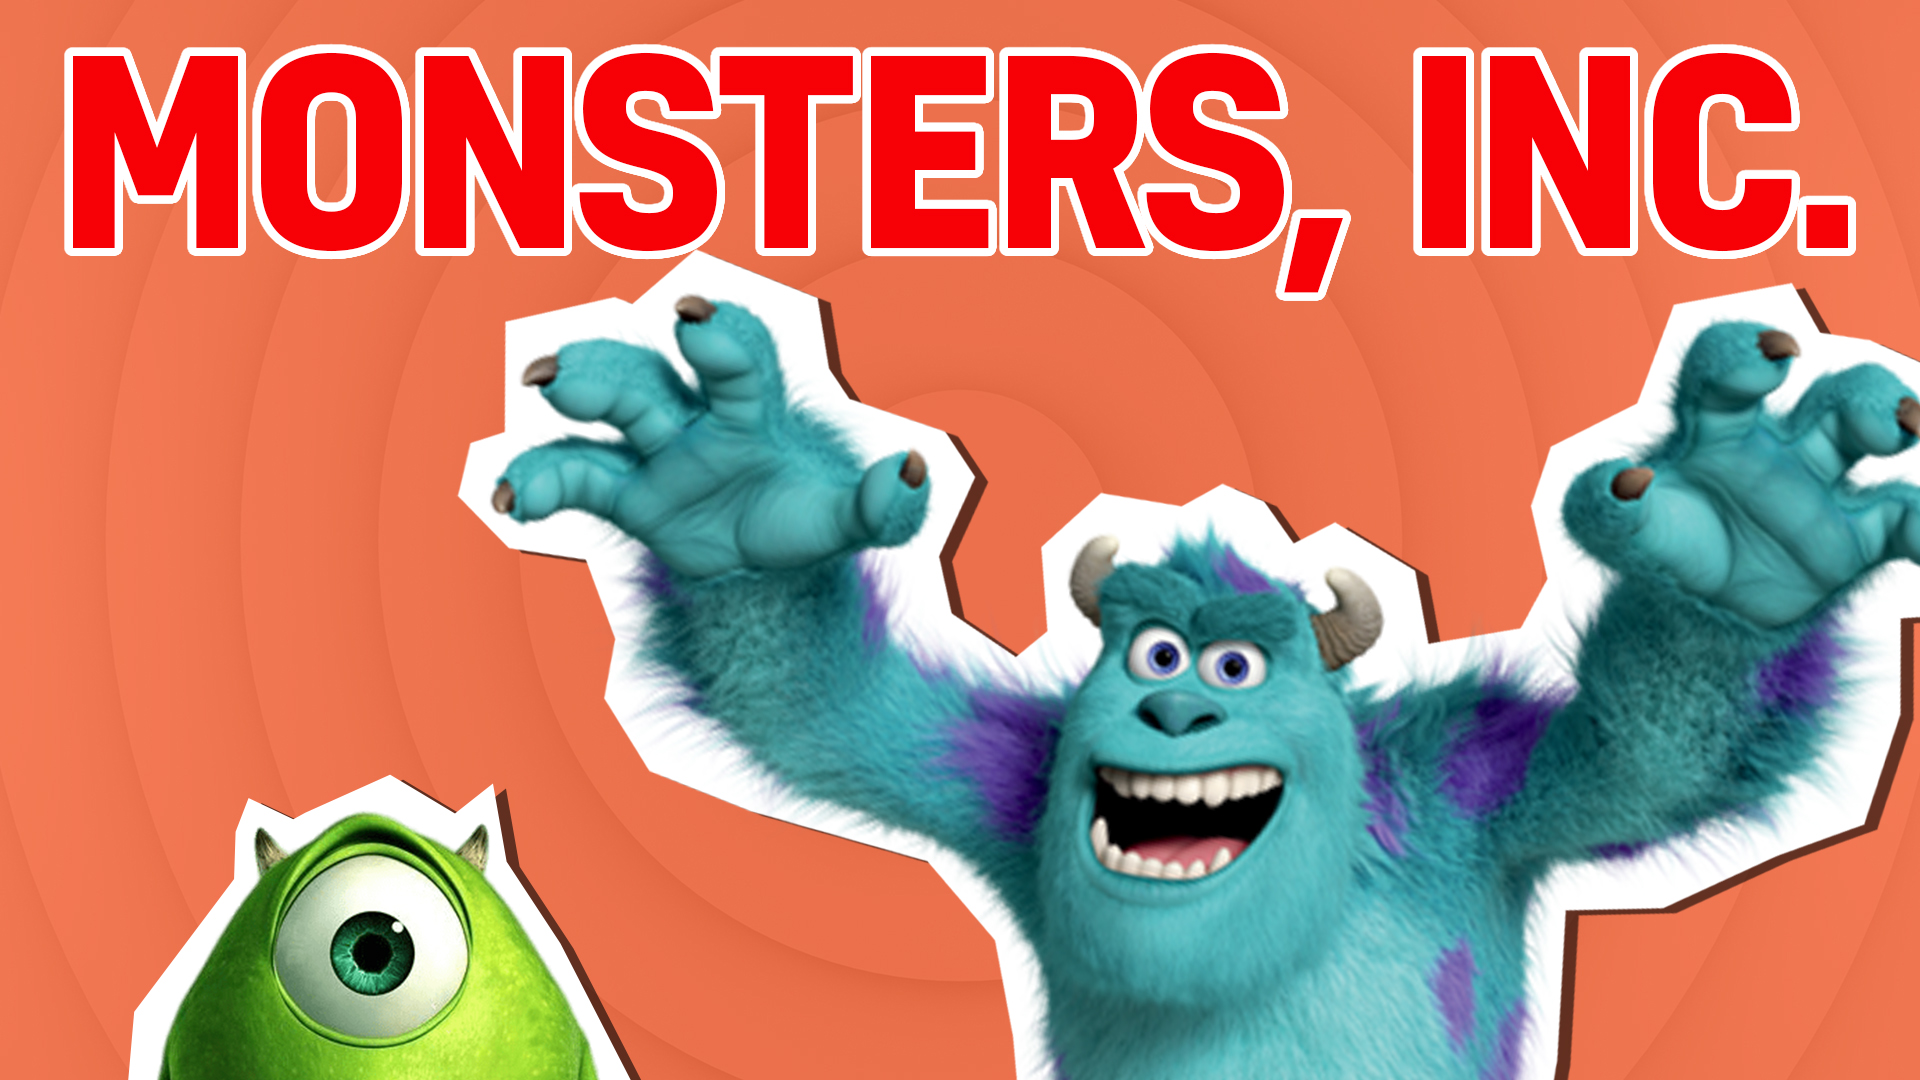 Mike and Sully from Monsters, Inc.